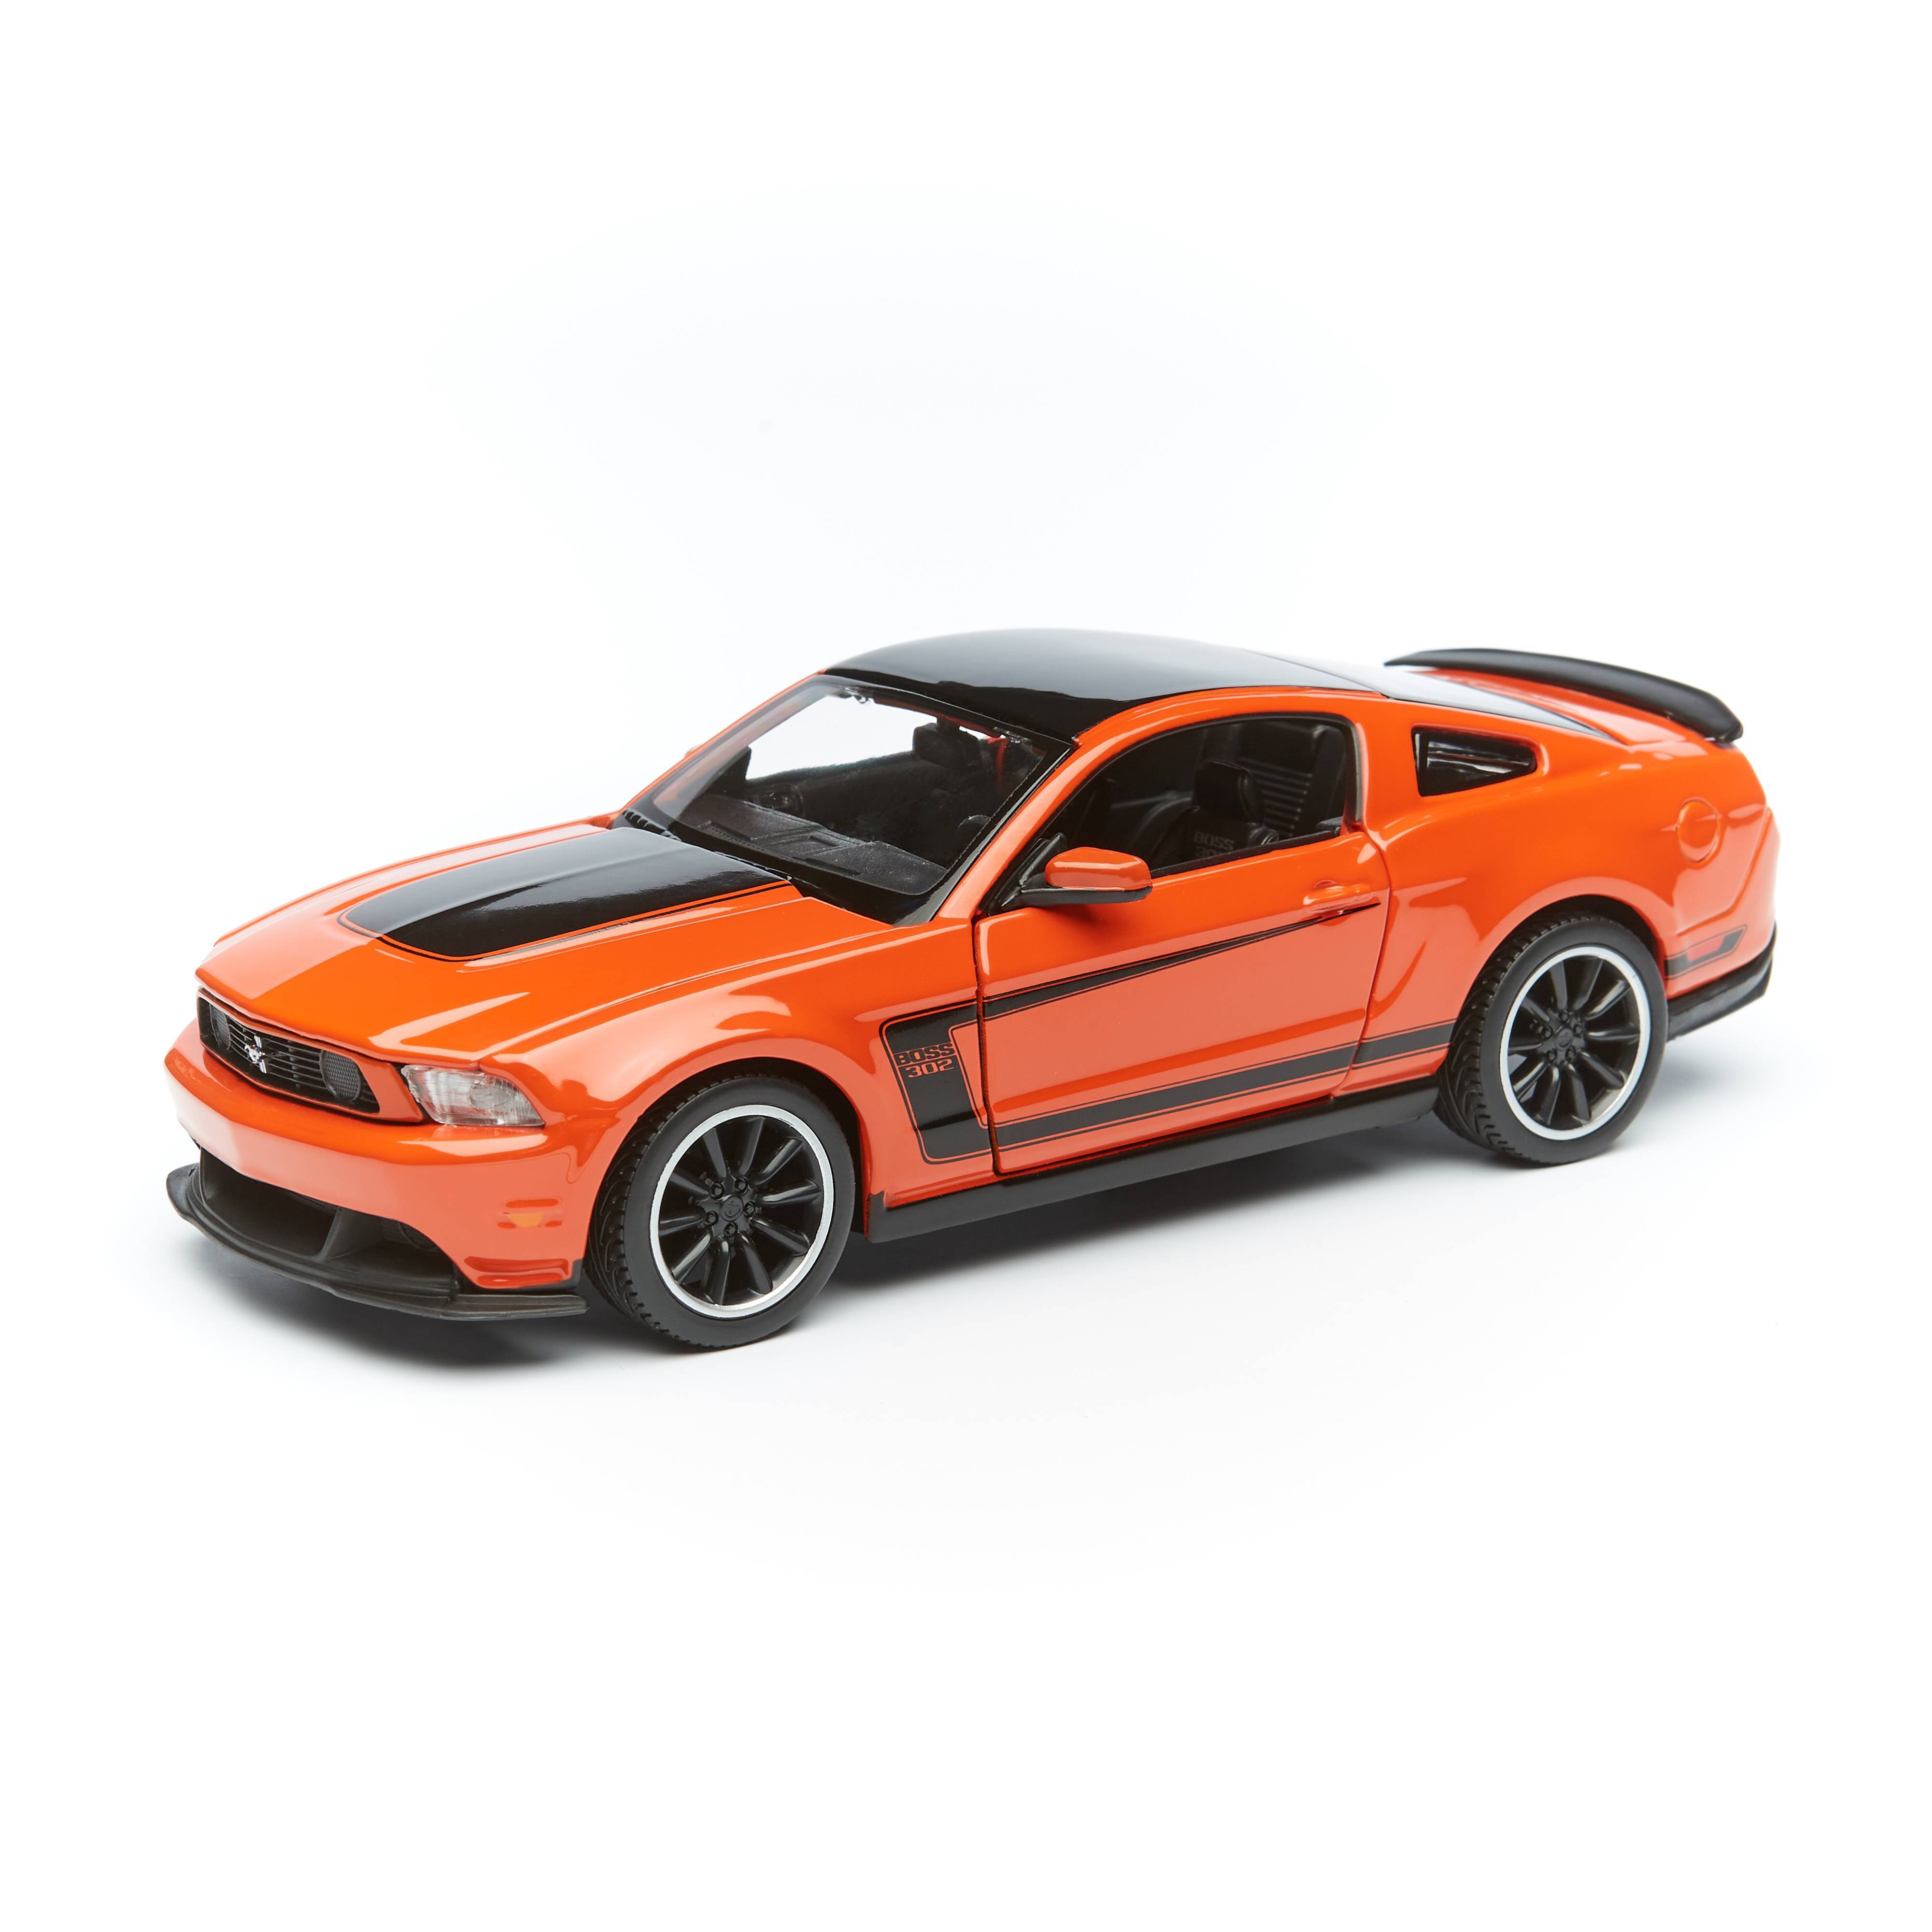 Игрушечная машинка Maisto Ford Mustang Boss 302 1:24, оранжевая 31519/31269/1 maisto 1 18 harley davidson 2018 forty eight special alloy static die casting motorcycle model classic car collectible gift toy